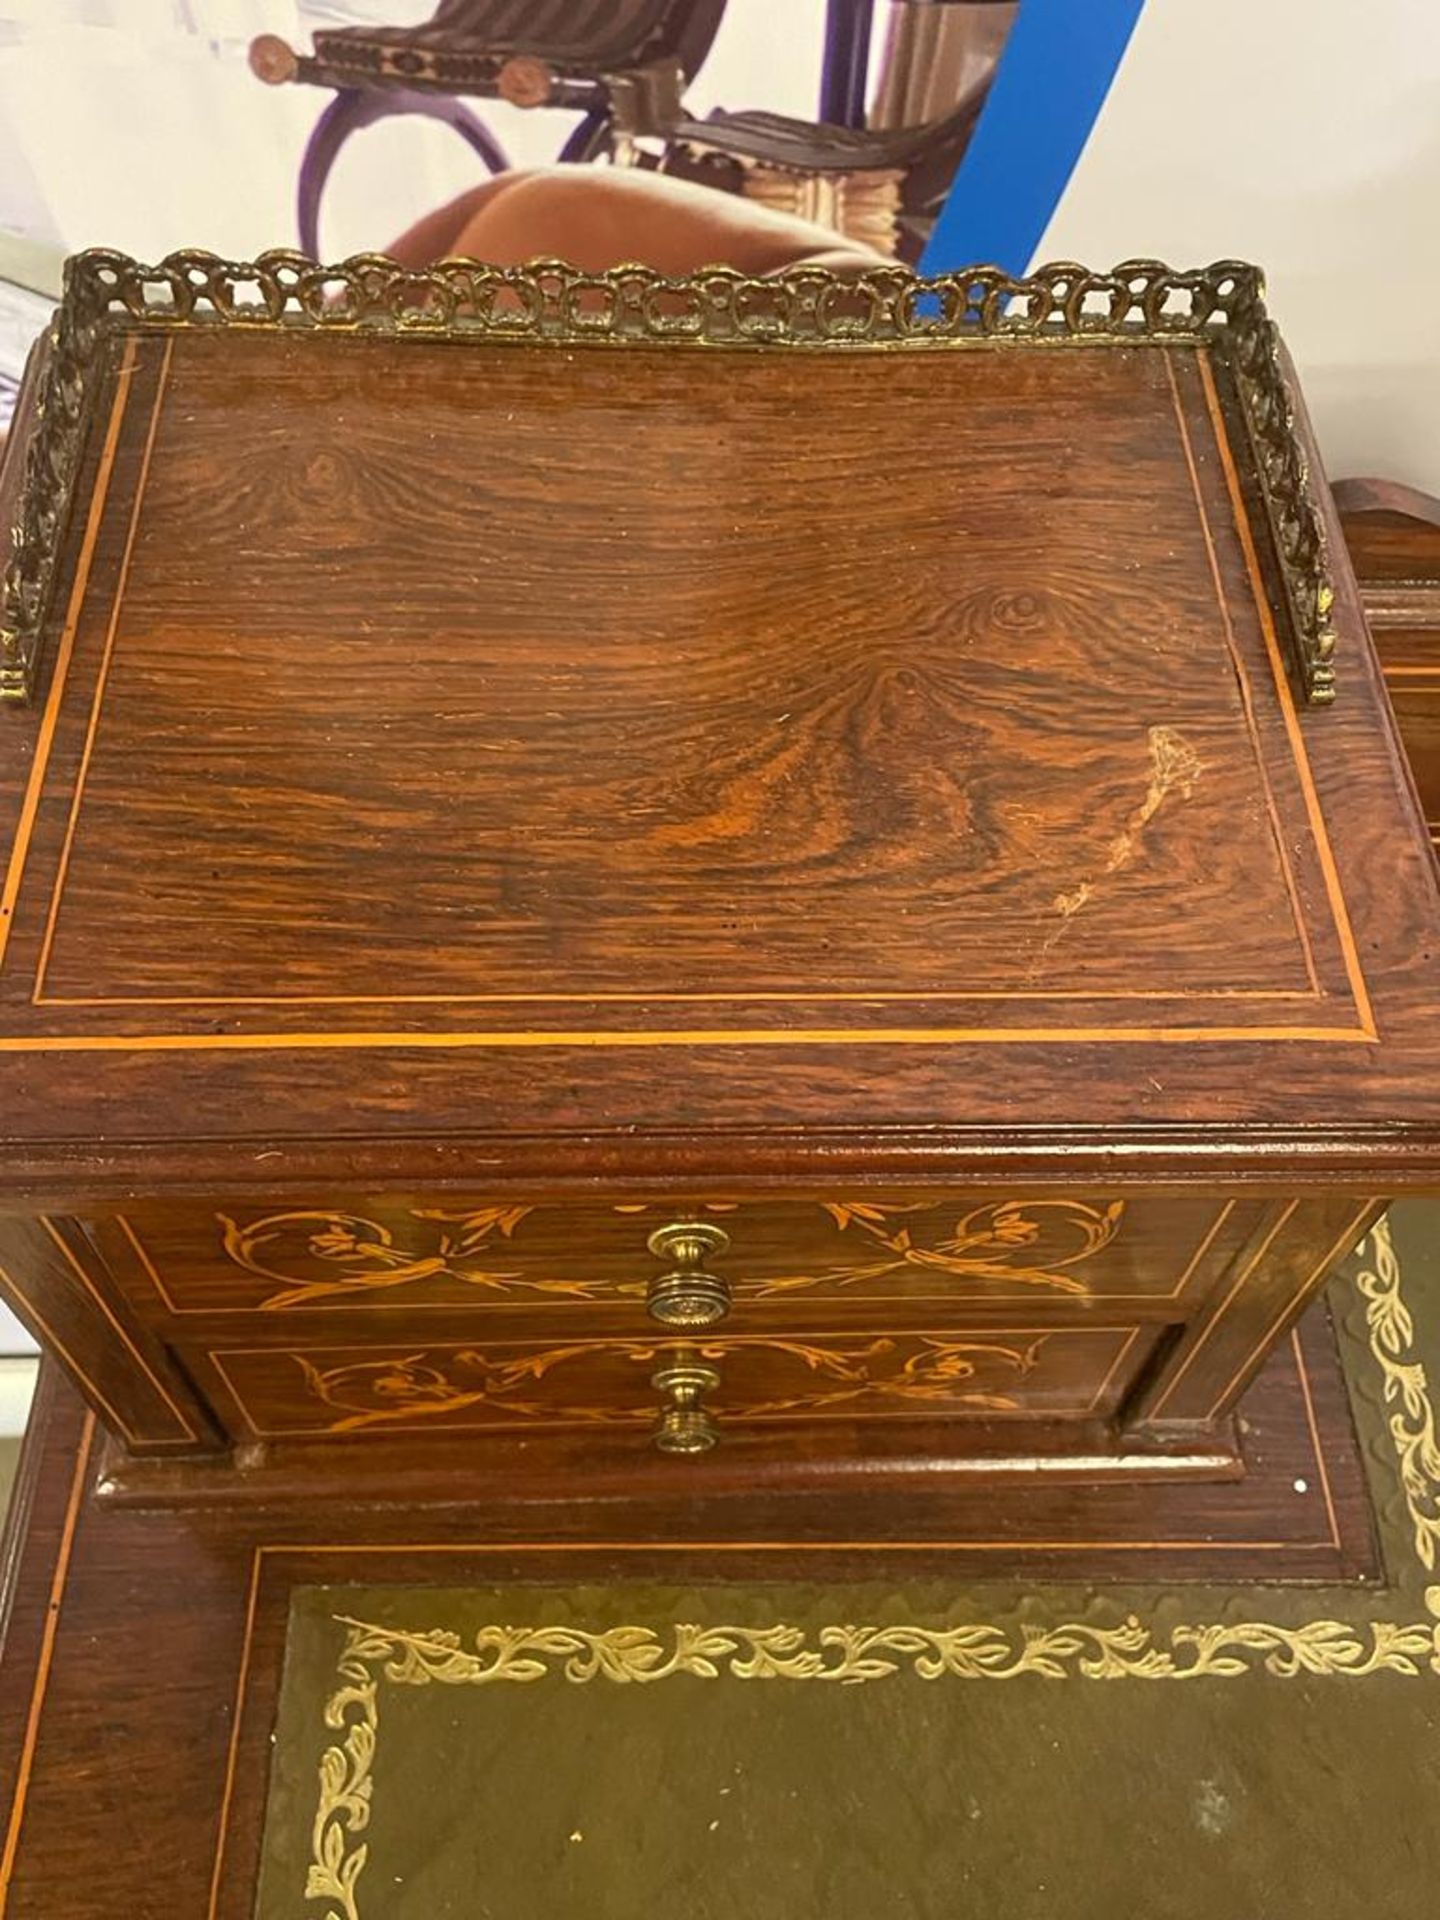 Mahogany Inlaid Marquetry Edwardian Carlton House style Desk The top of the desk is surmounted - Bild 3 aus 4